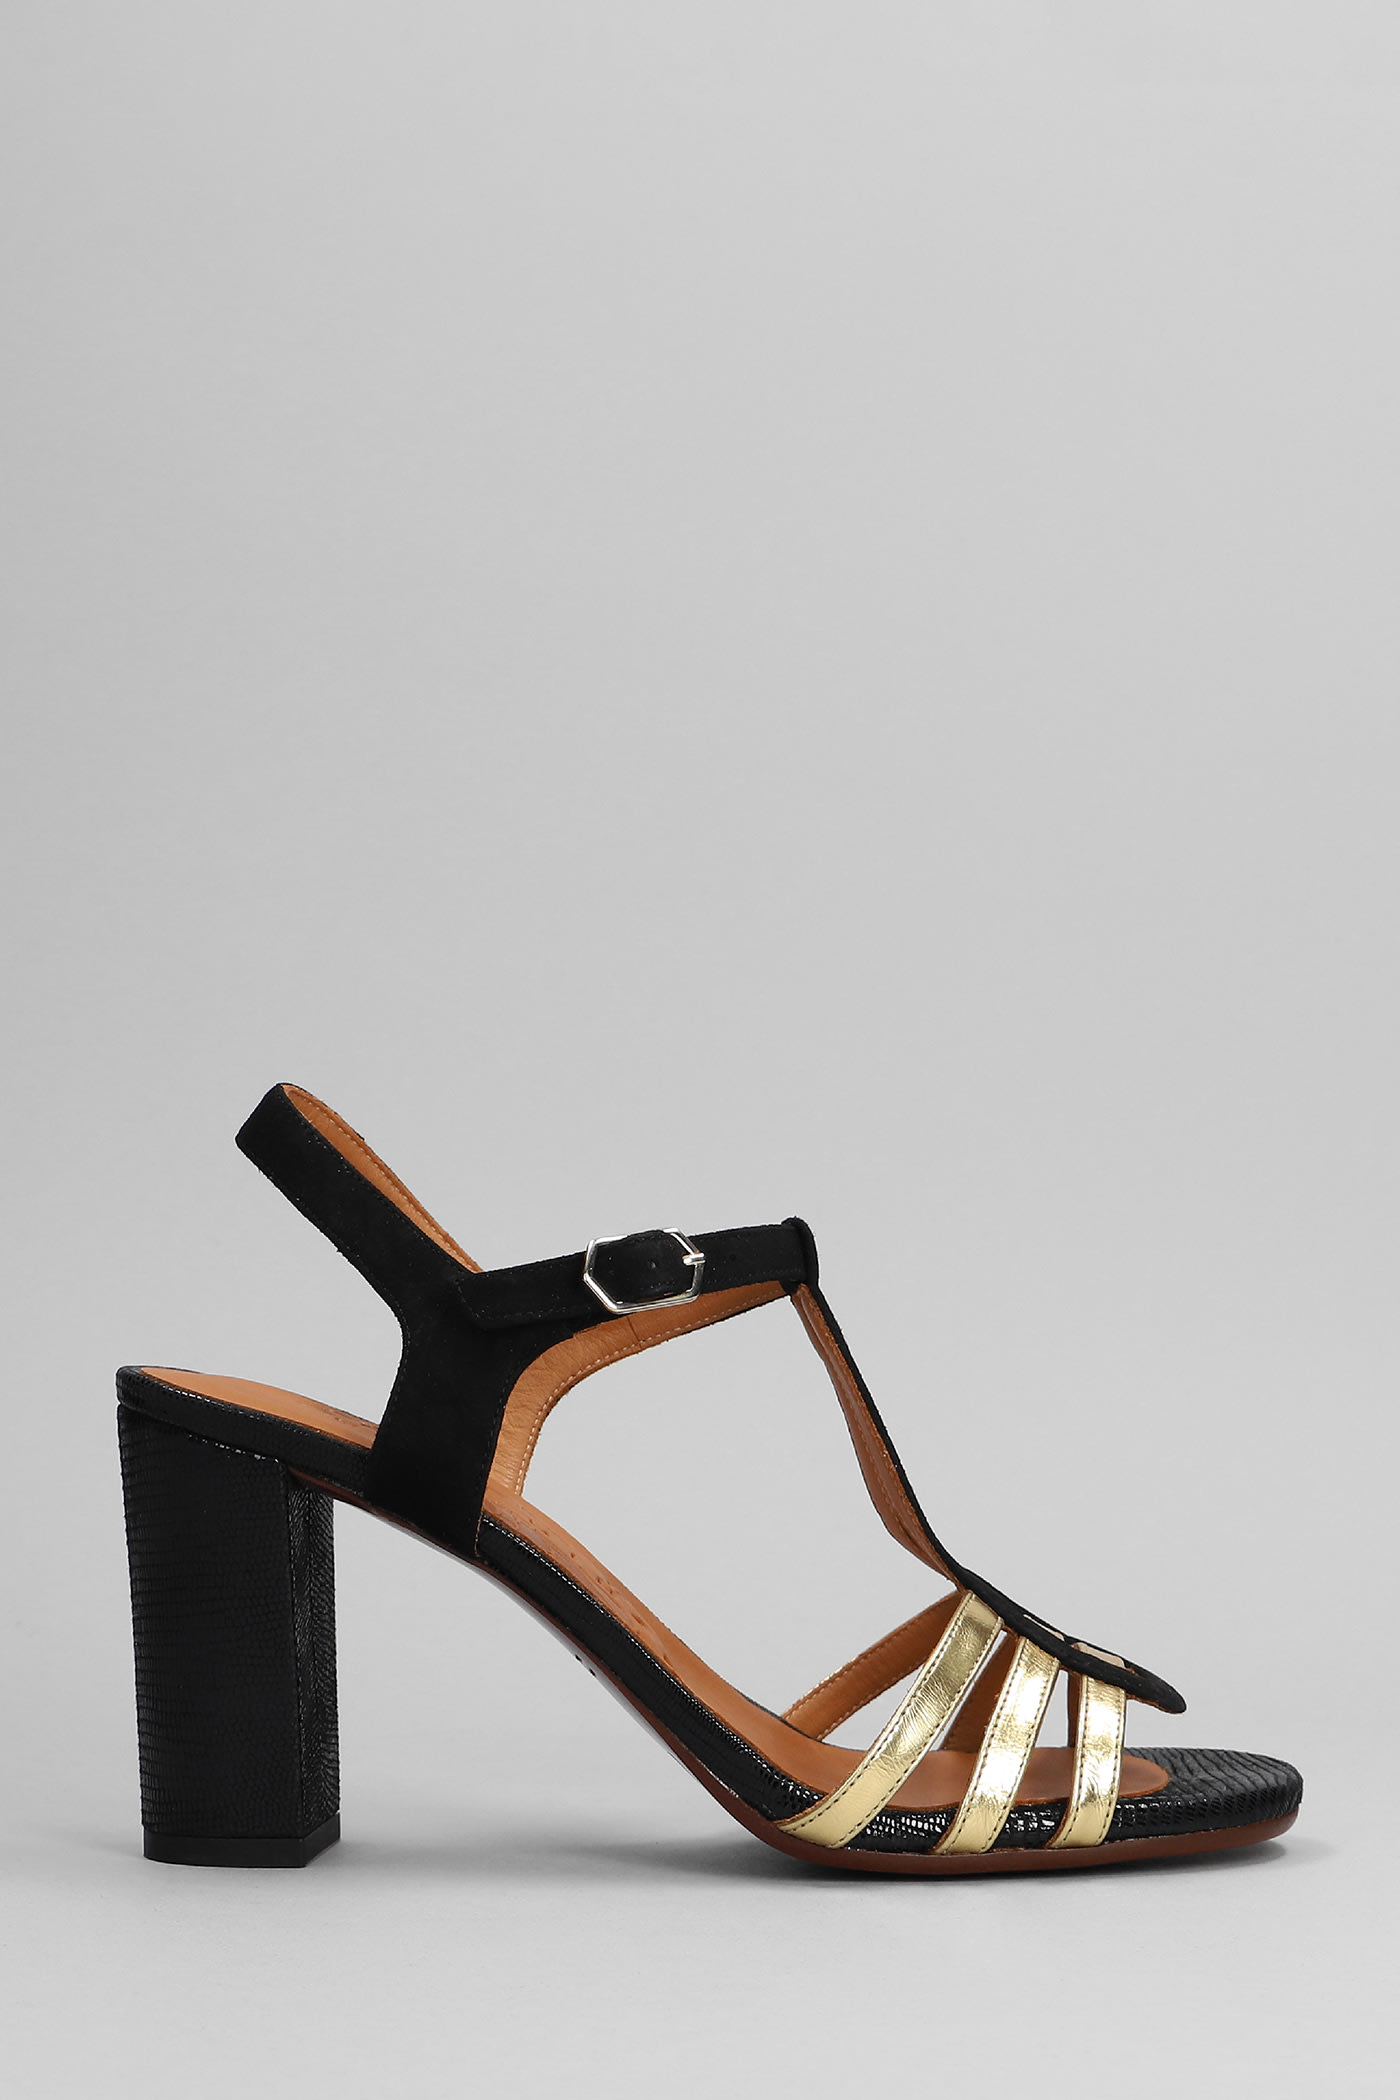 Chie Mihara Babi Sandals In Black Suede And Leather